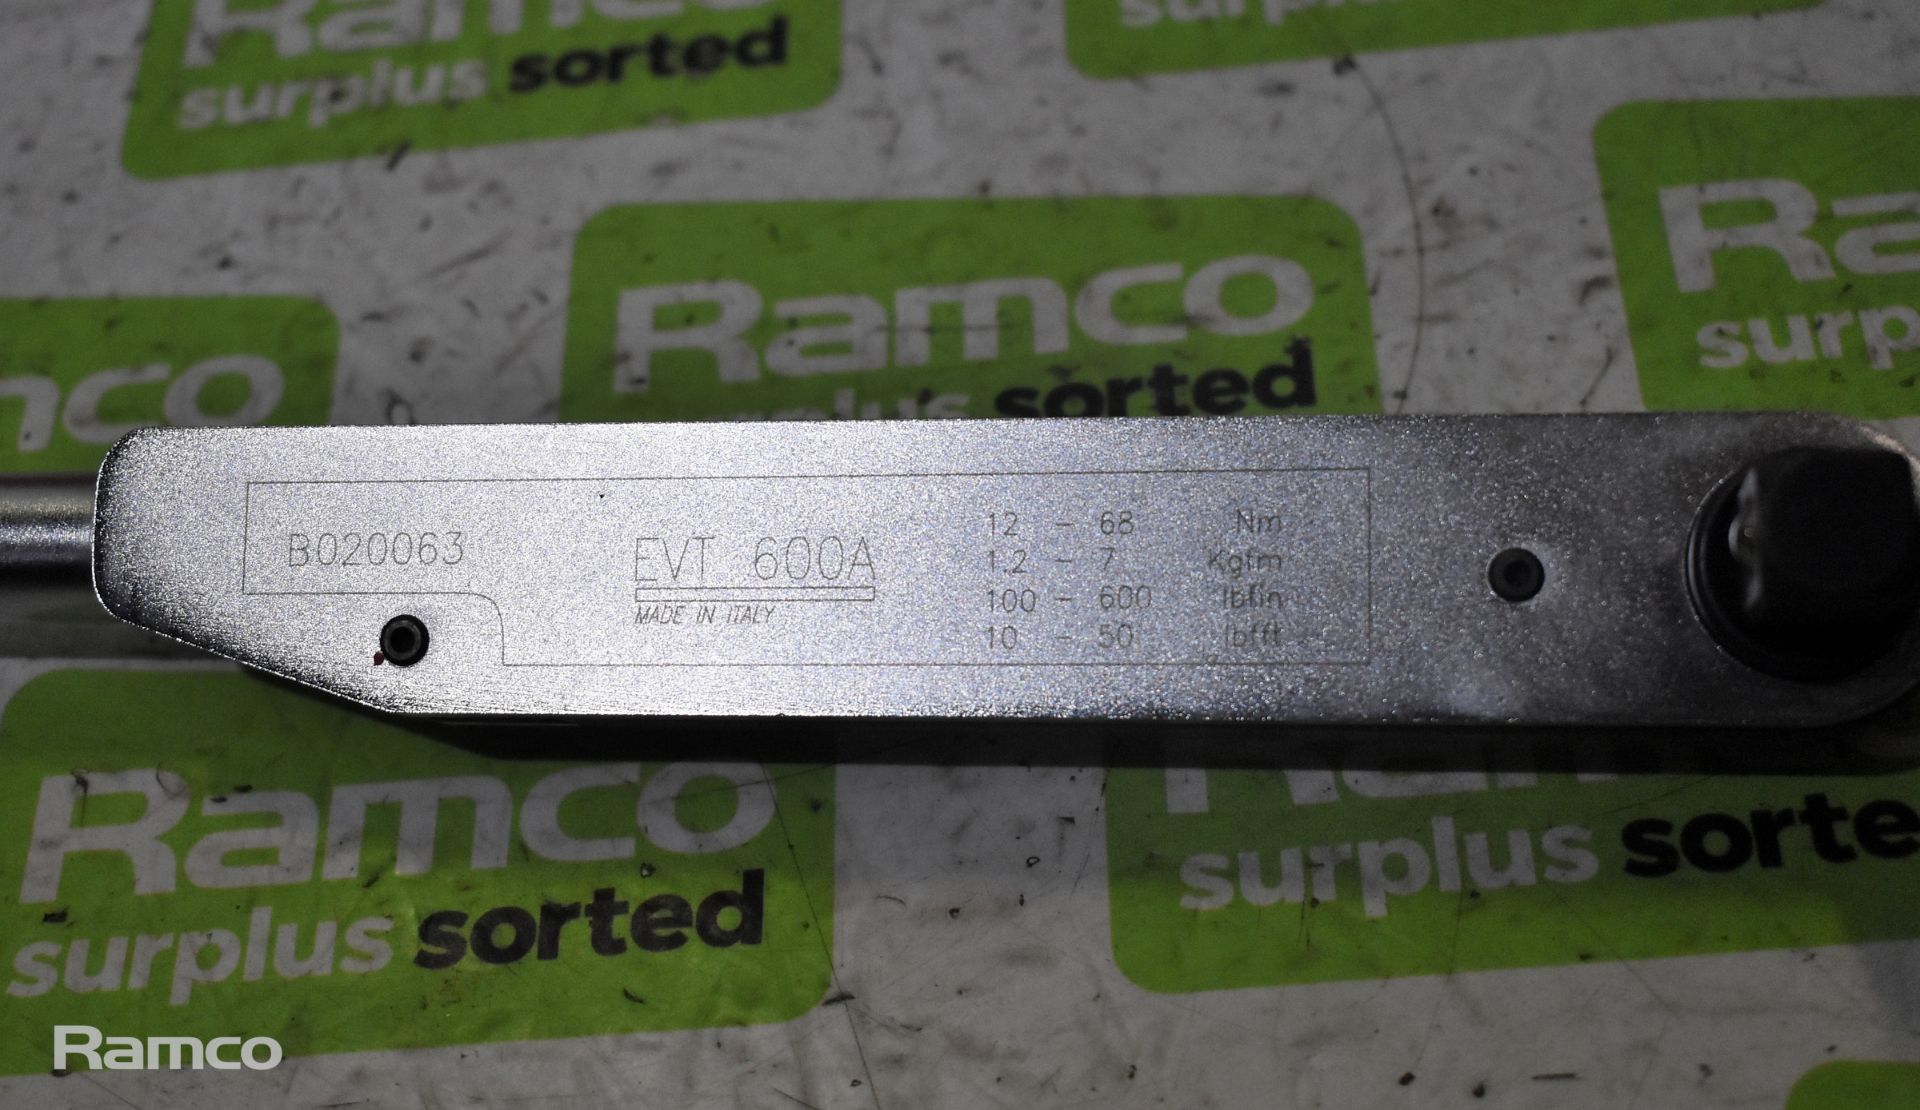 Britool EVT 600a torque wrench - L 580 x W 90 x H 70mm - Image 3 of 4